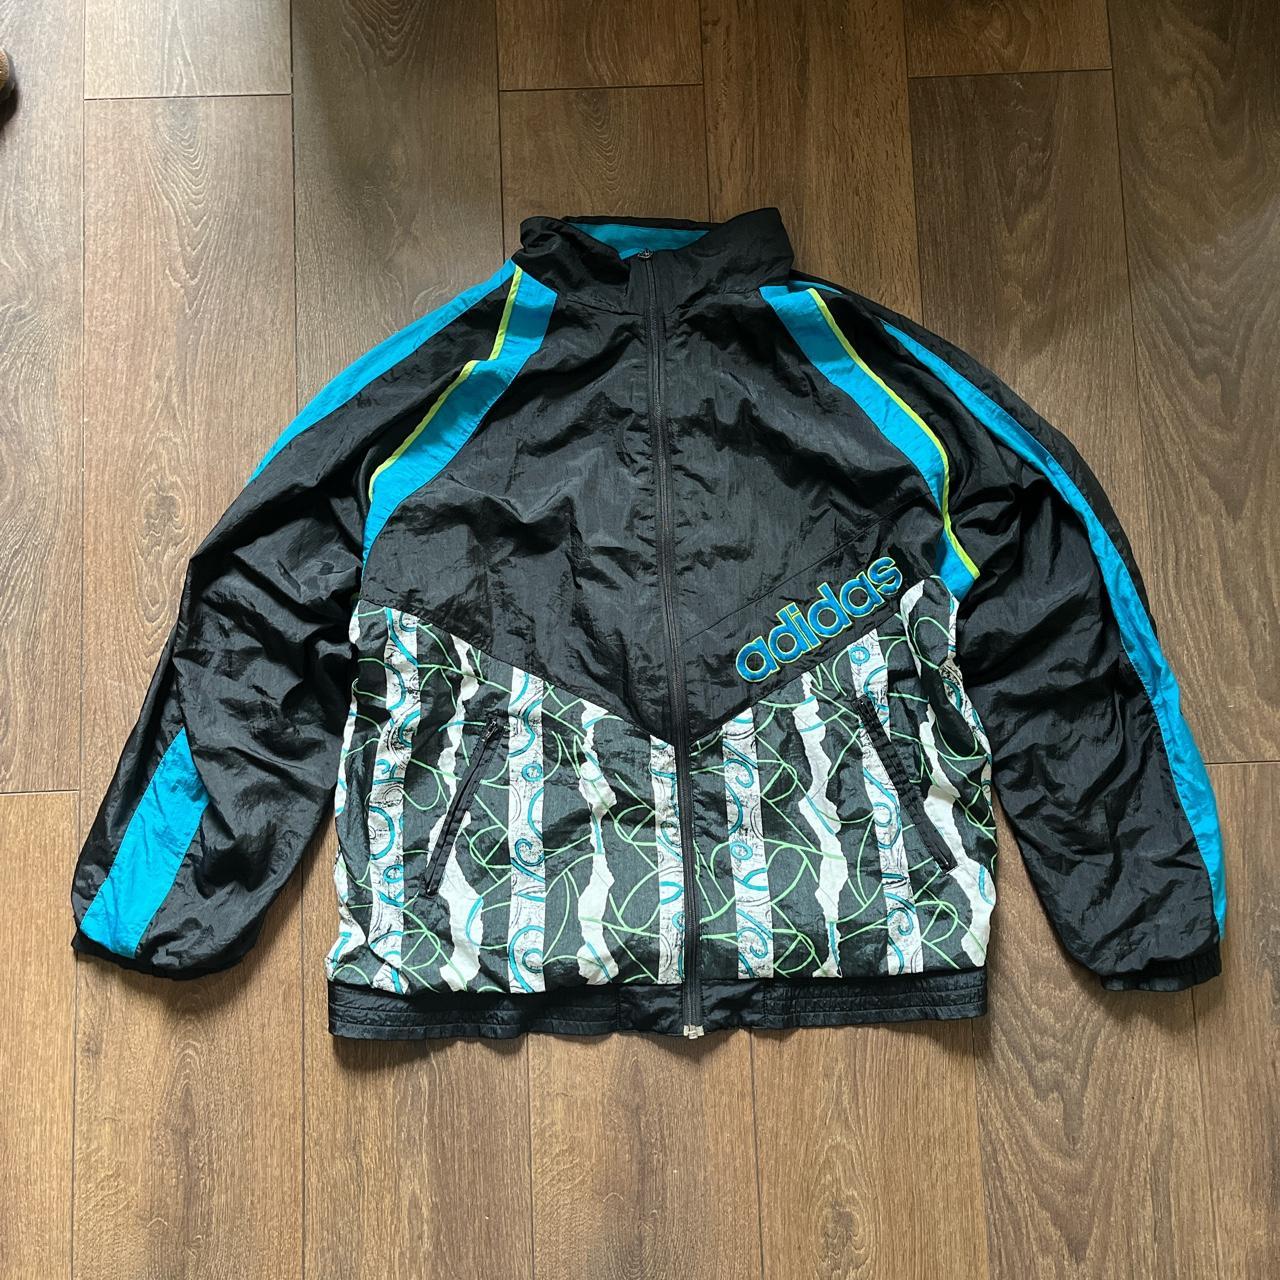 Crazy 90s adidas track jacket / shell suit /... - Depop